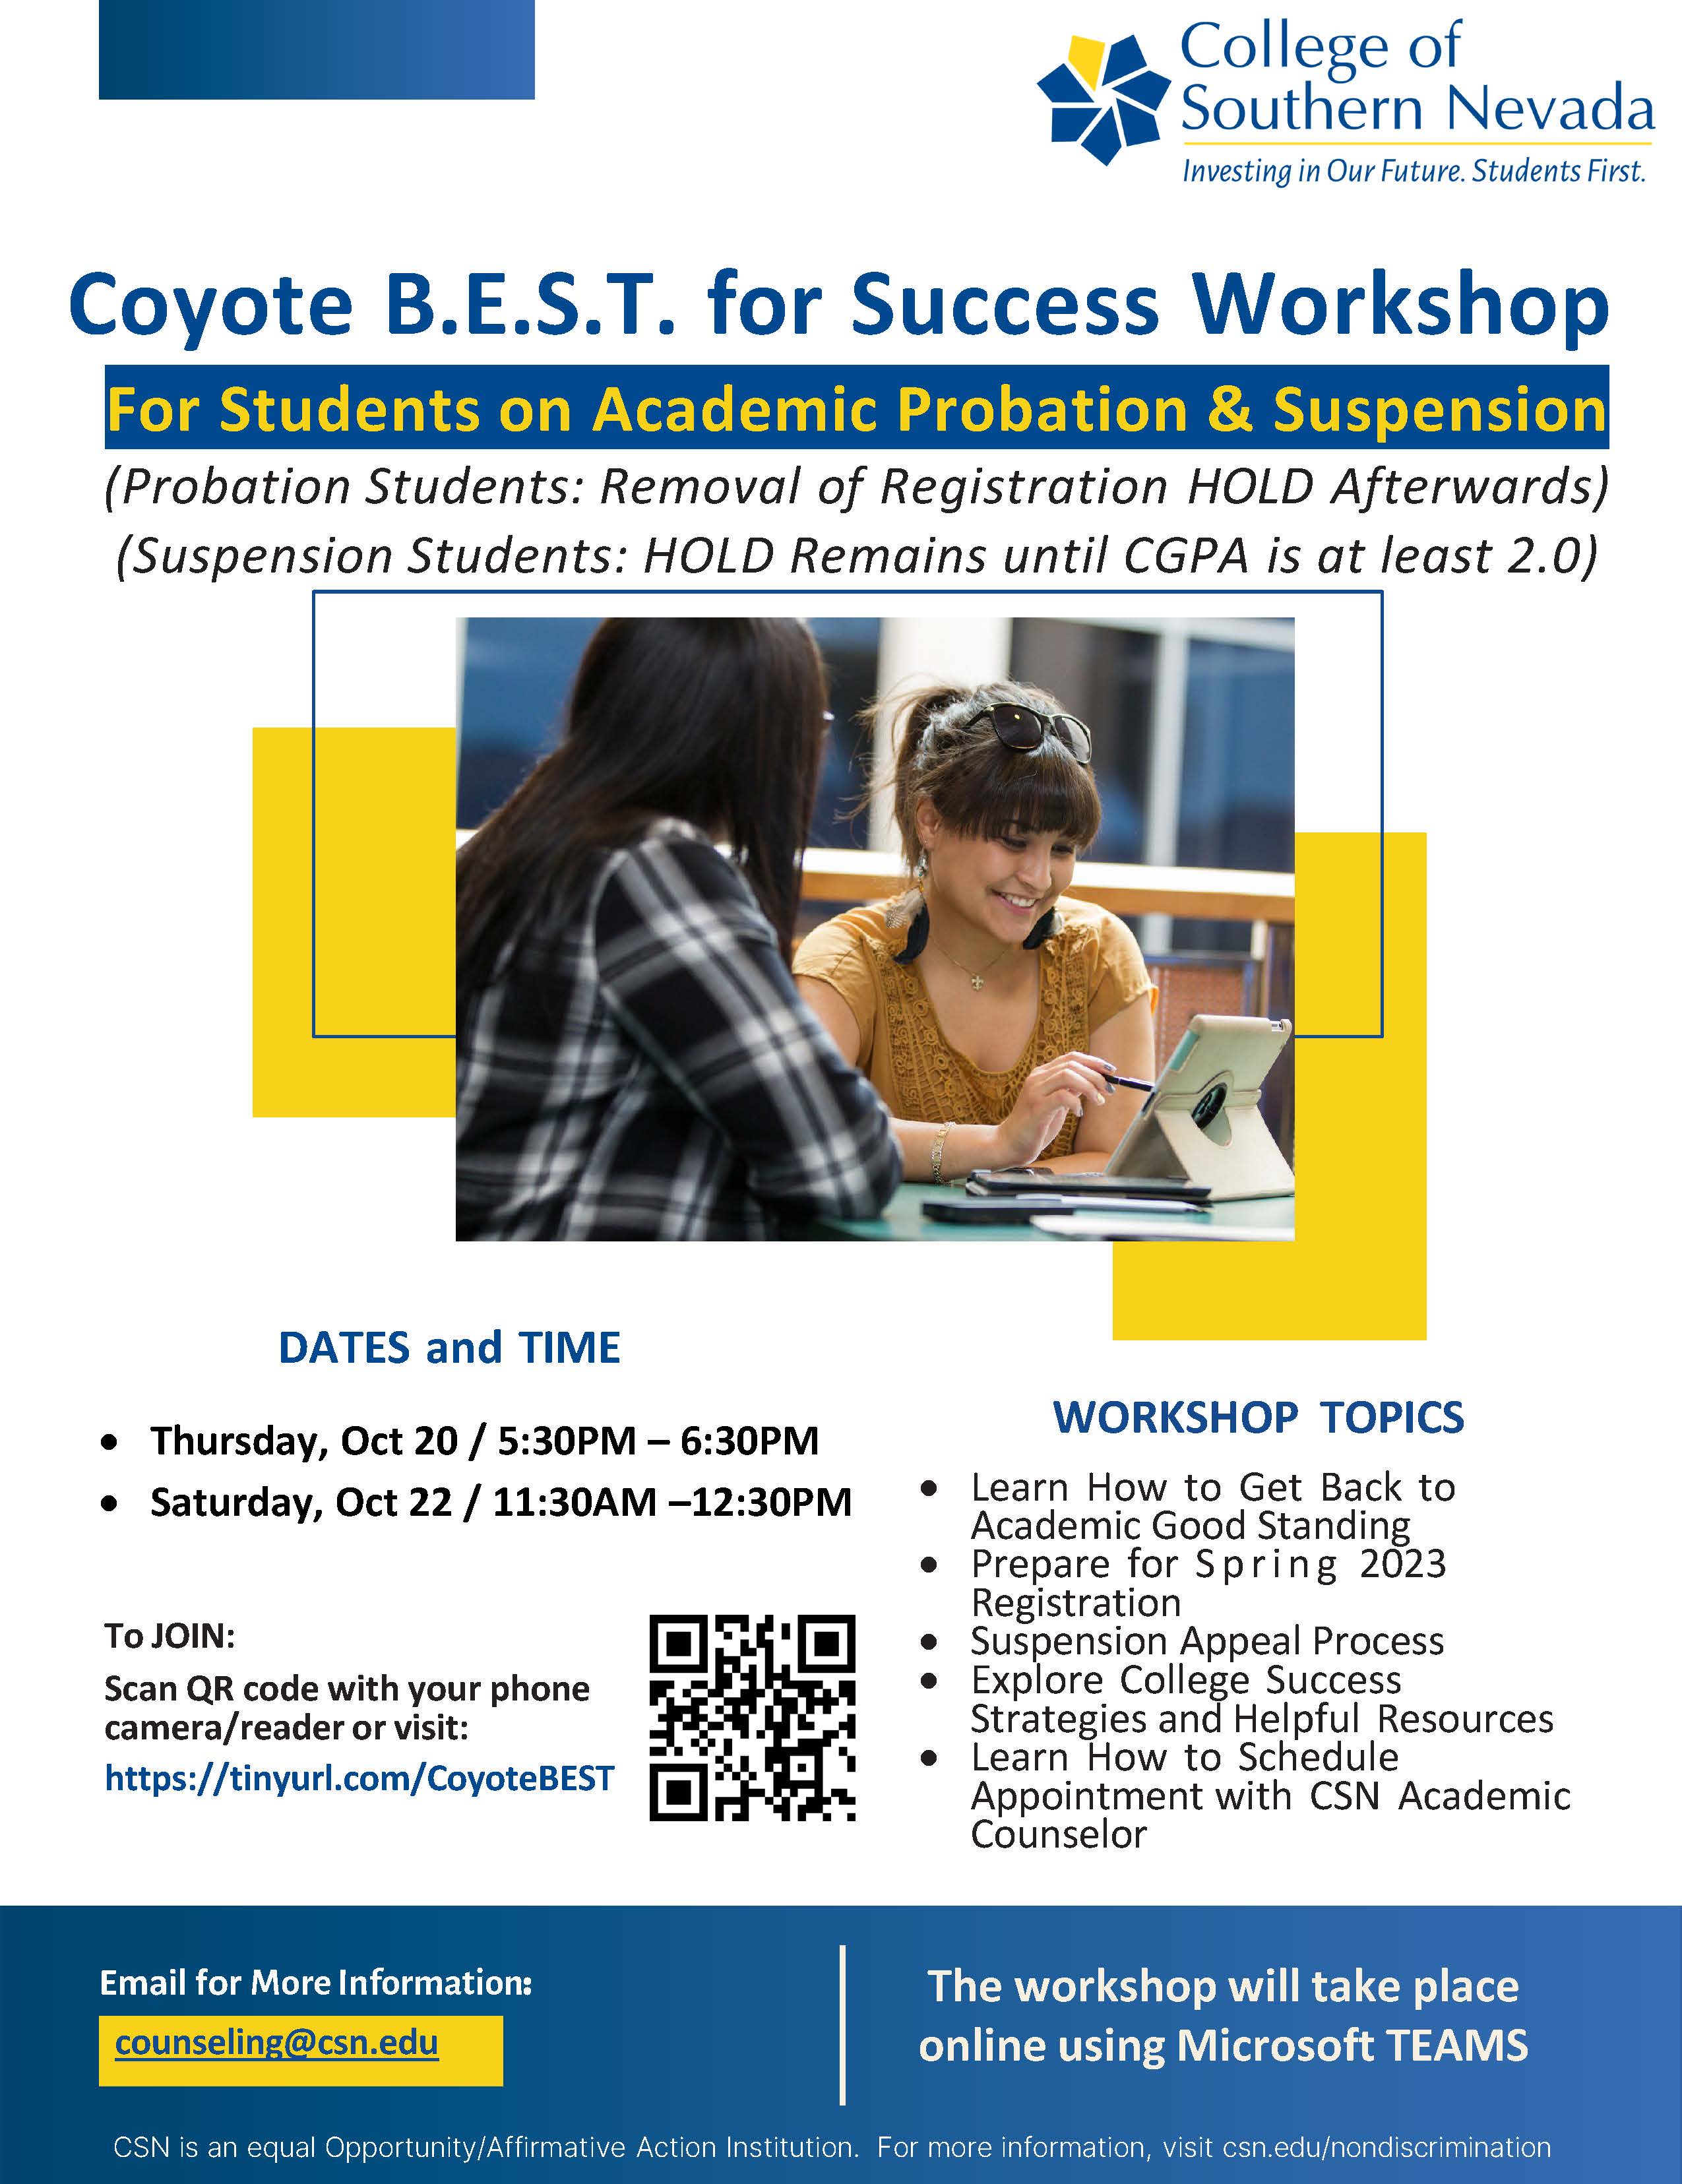 Coyote B.E.S.T for Success Workshop on Oct 20 -22, 2022